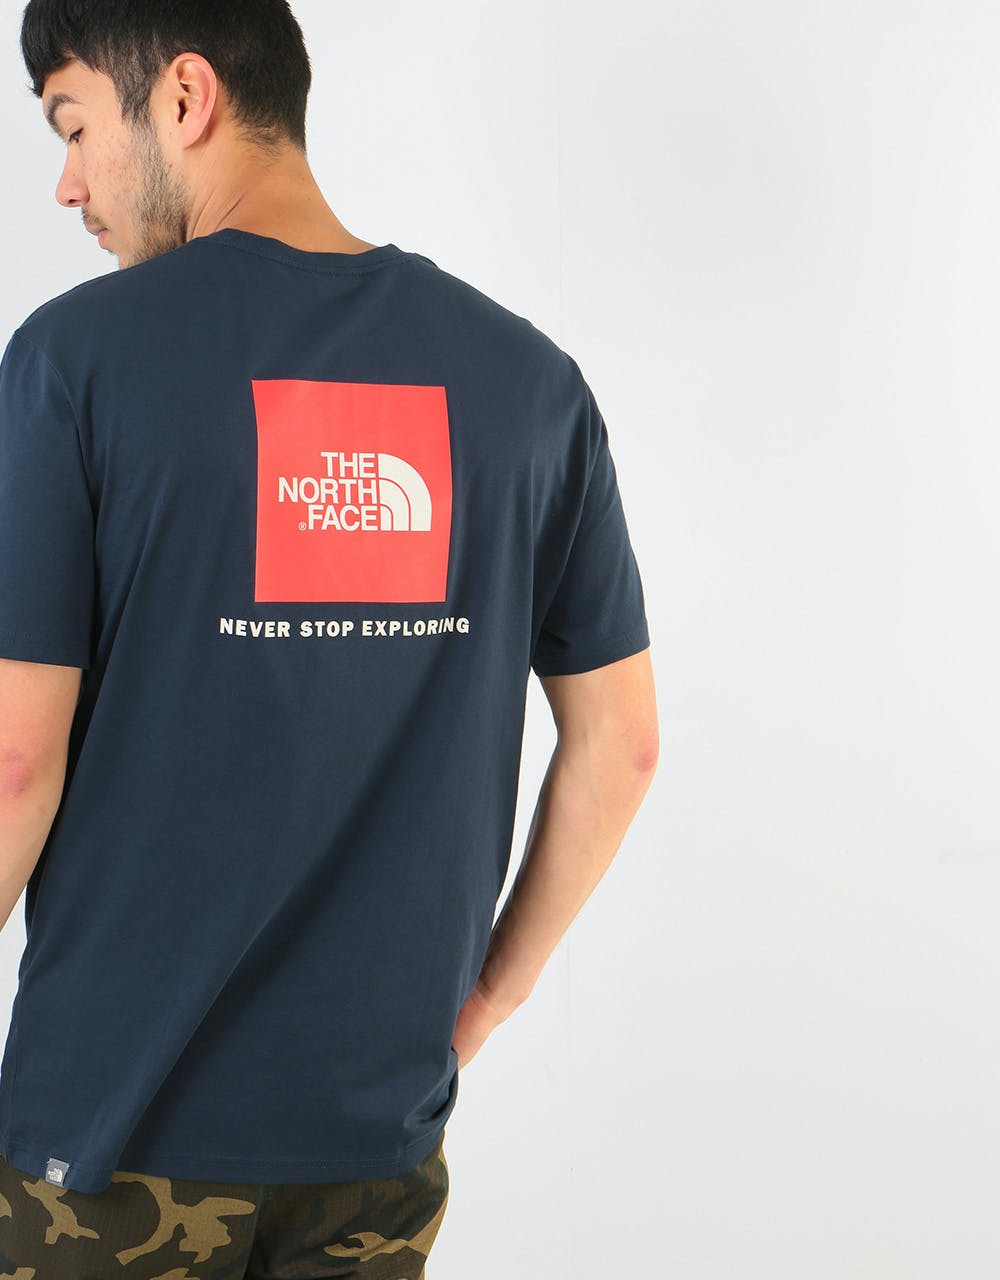 The North Face S/S Red Box T-Shirt - Urban Navy/Fiery Red